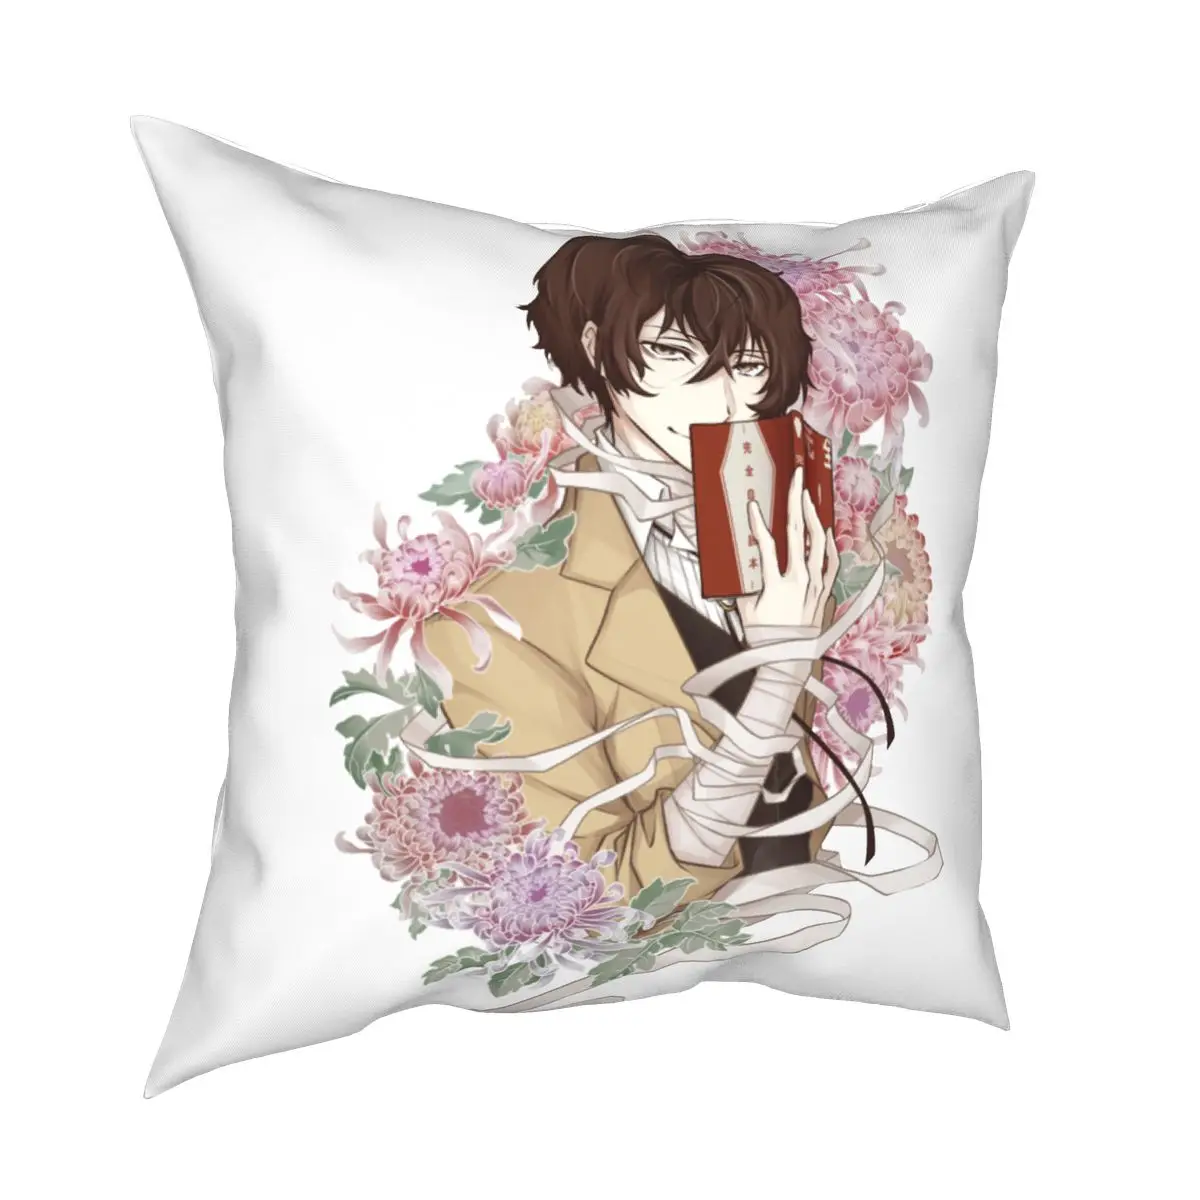 Anime Bungou Stray Dogs two sided Pillow Case Cover 188 